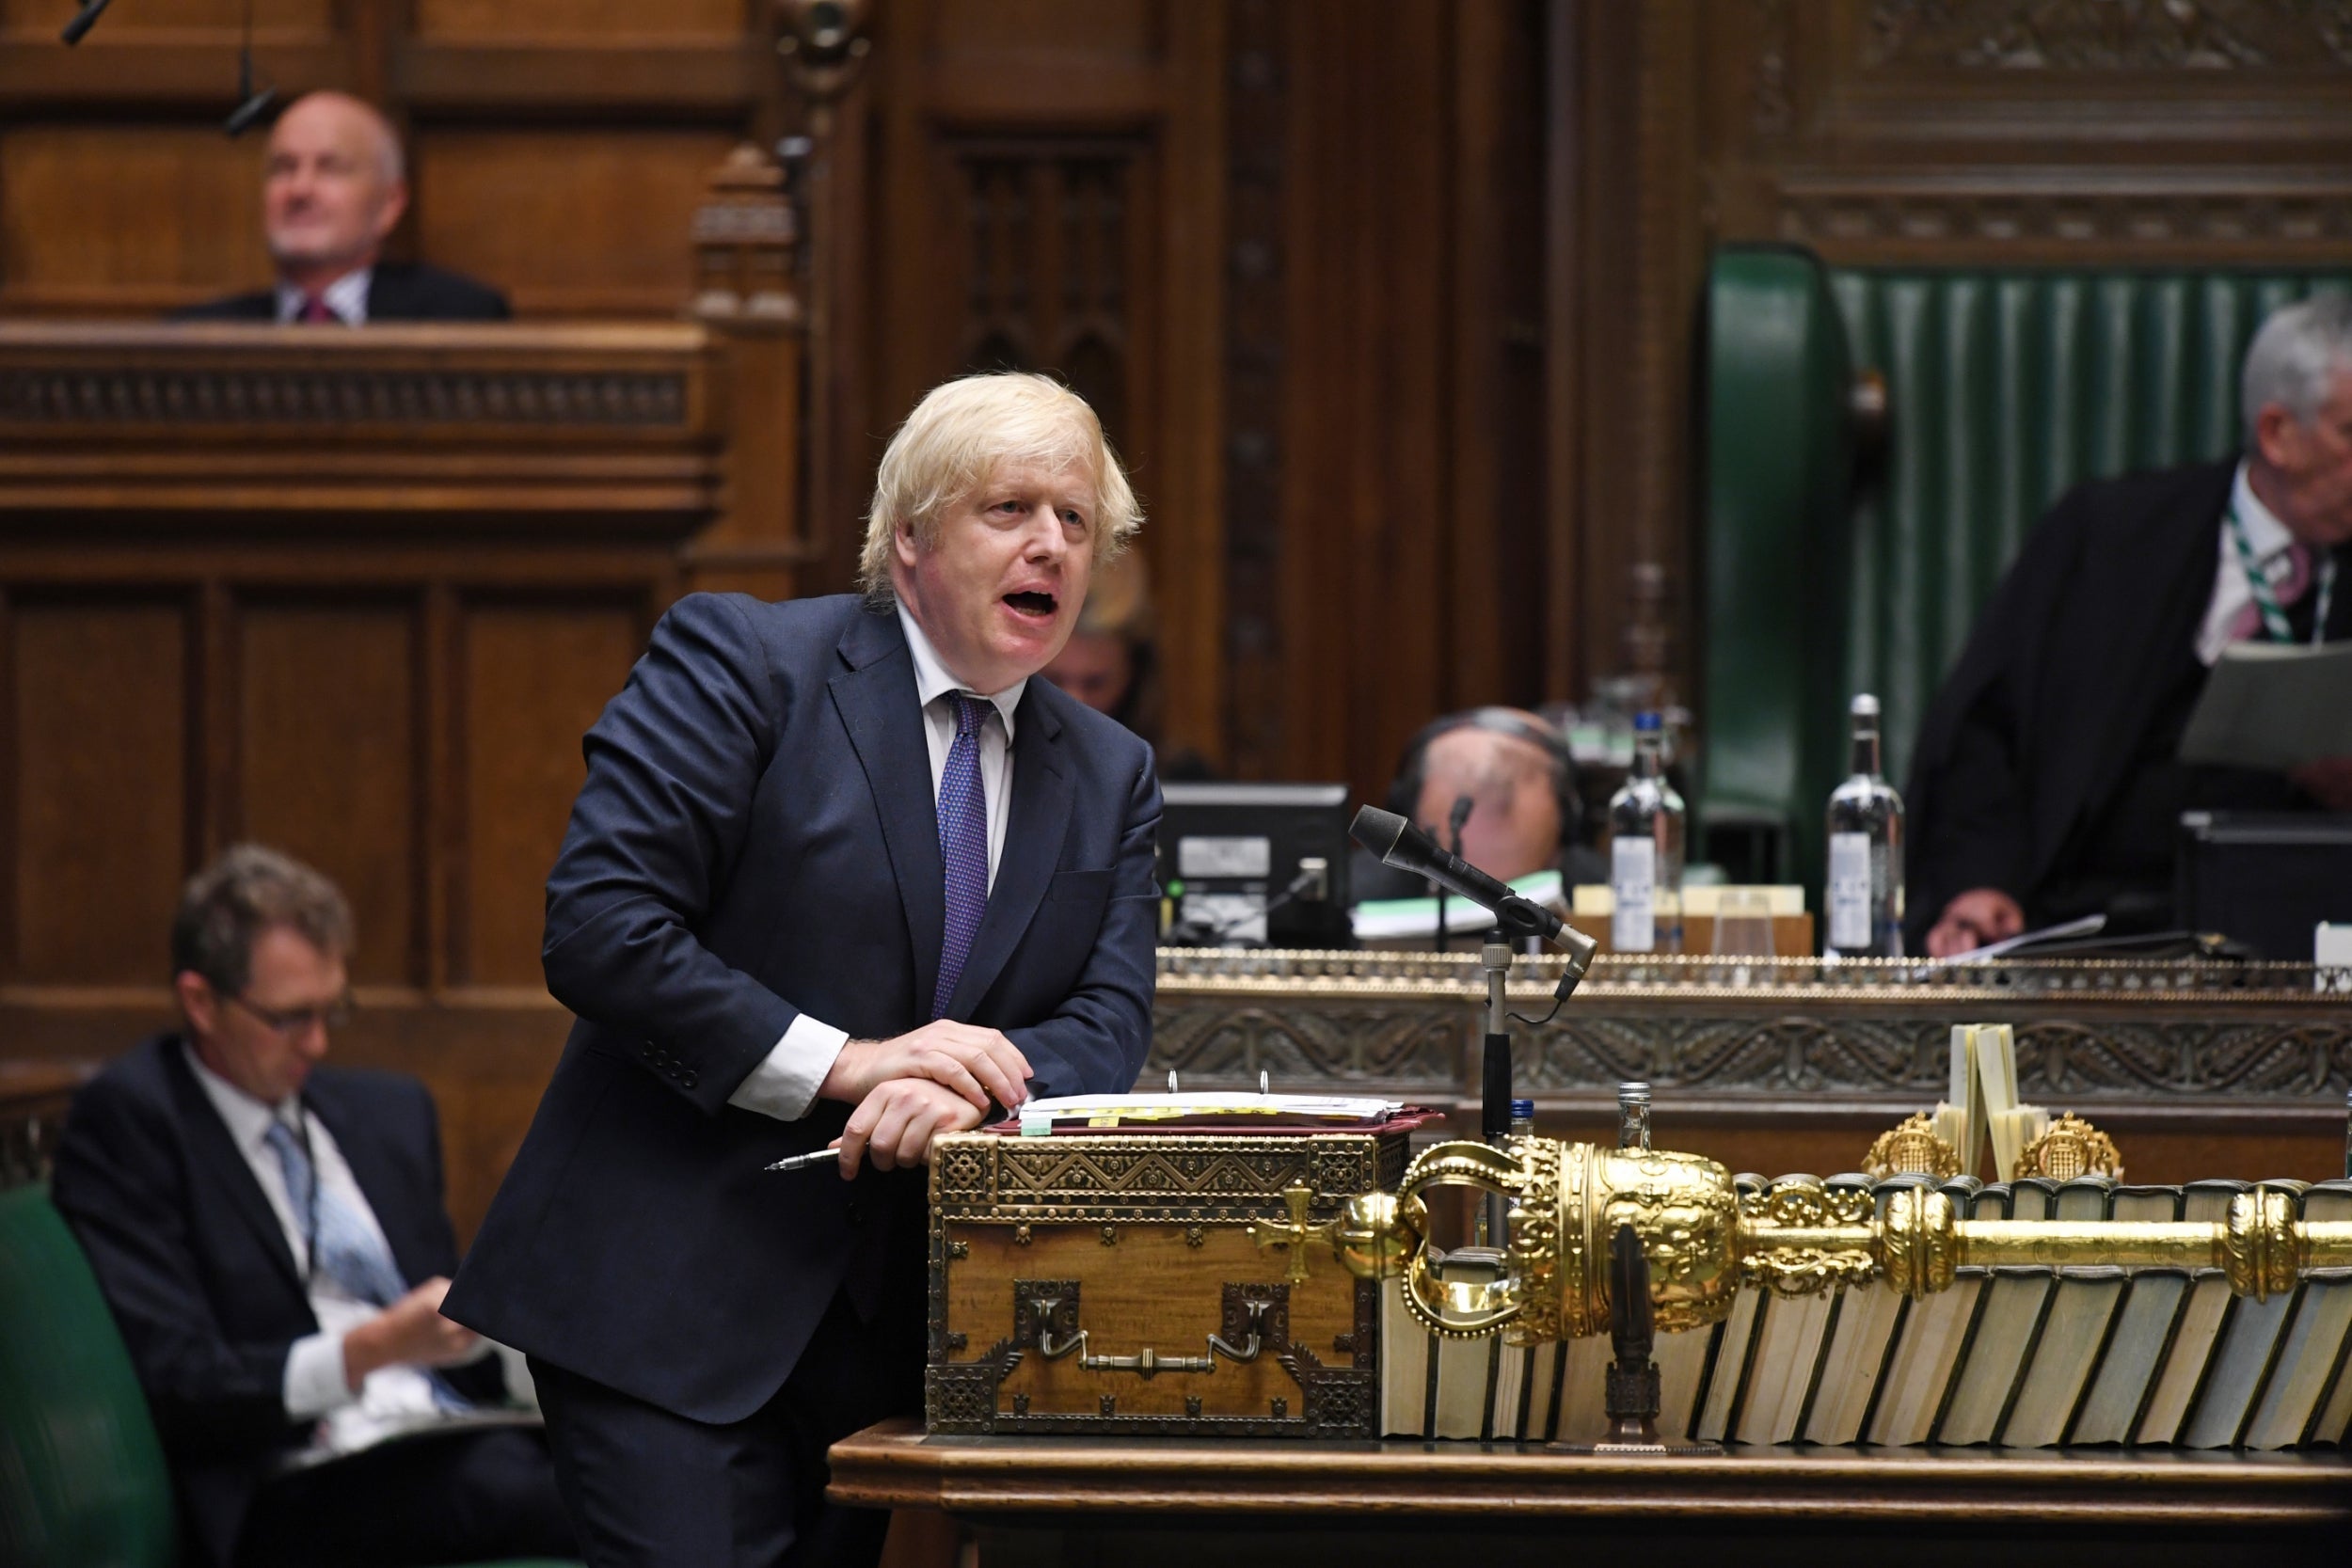 Boris Johnson’s government has been slow to react to a number of issues around coronavirus